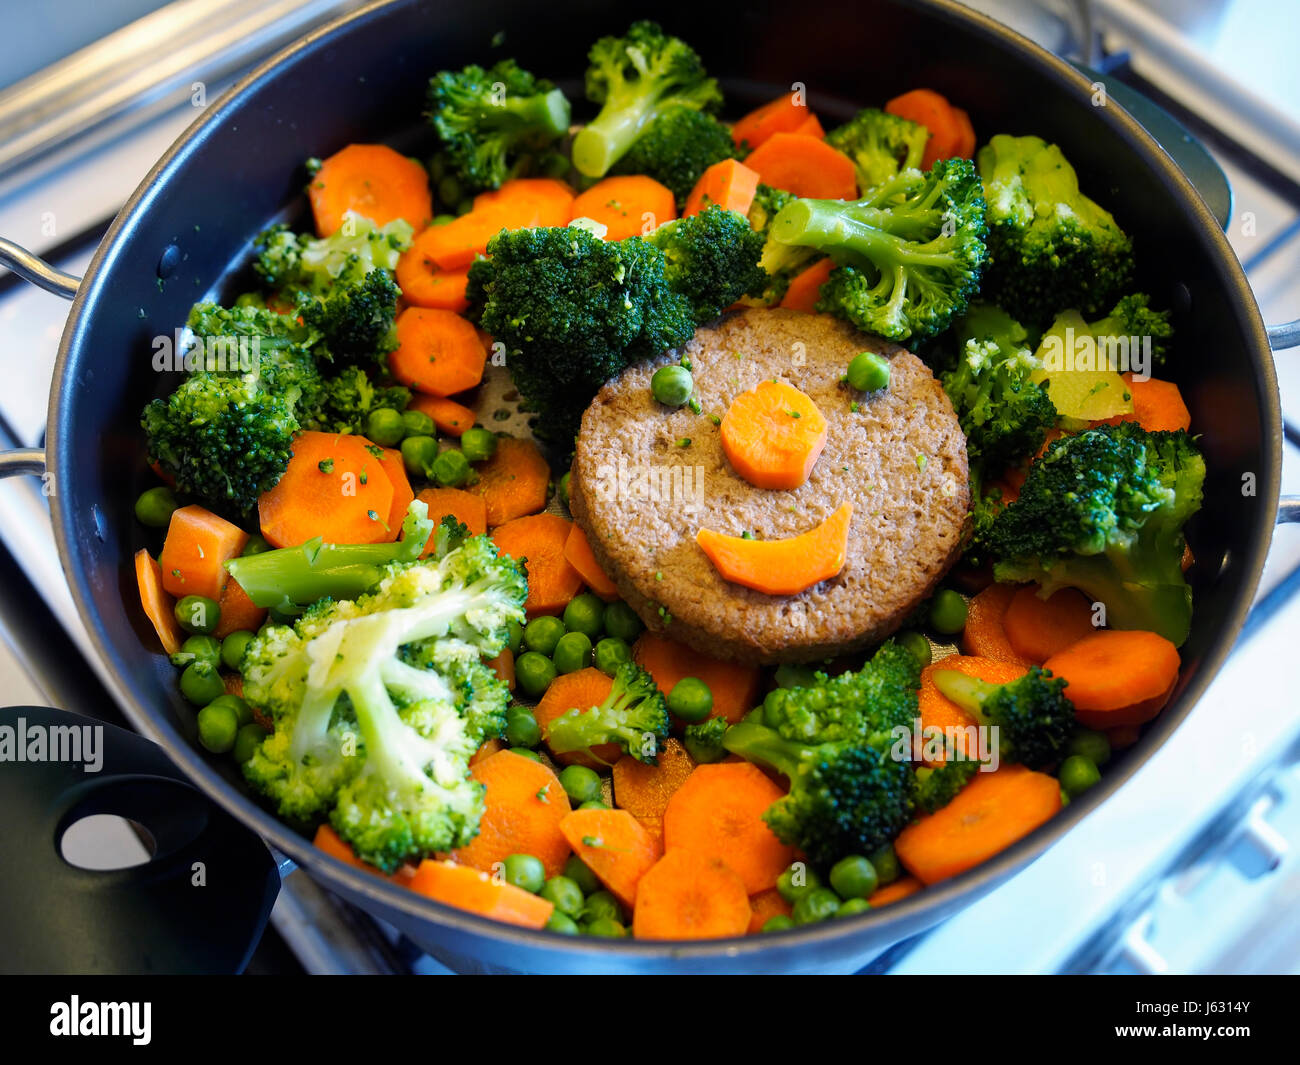 Vegan food: cooking a smiling soy burger and vegetables. Stock Photo